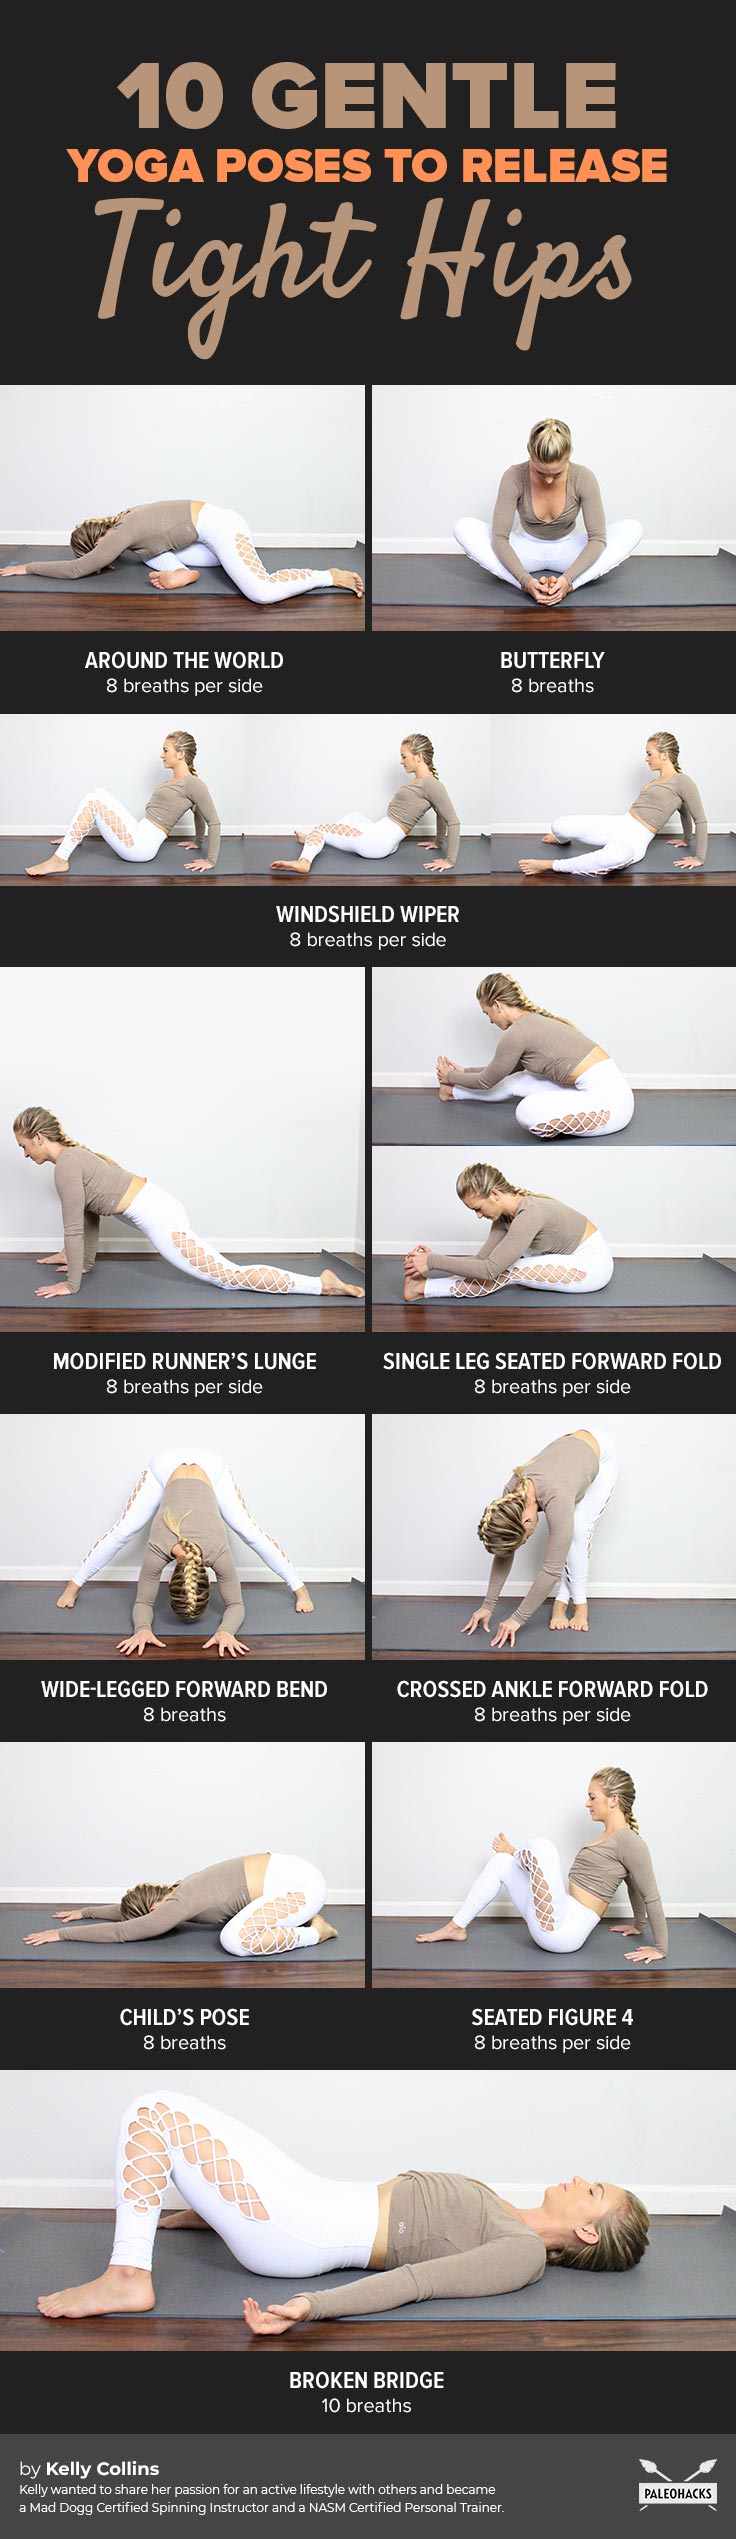 Many people experience tight hips due to either too much sitting or an unbalanced exercise program. These 10 yoga poses can help balance things back out.